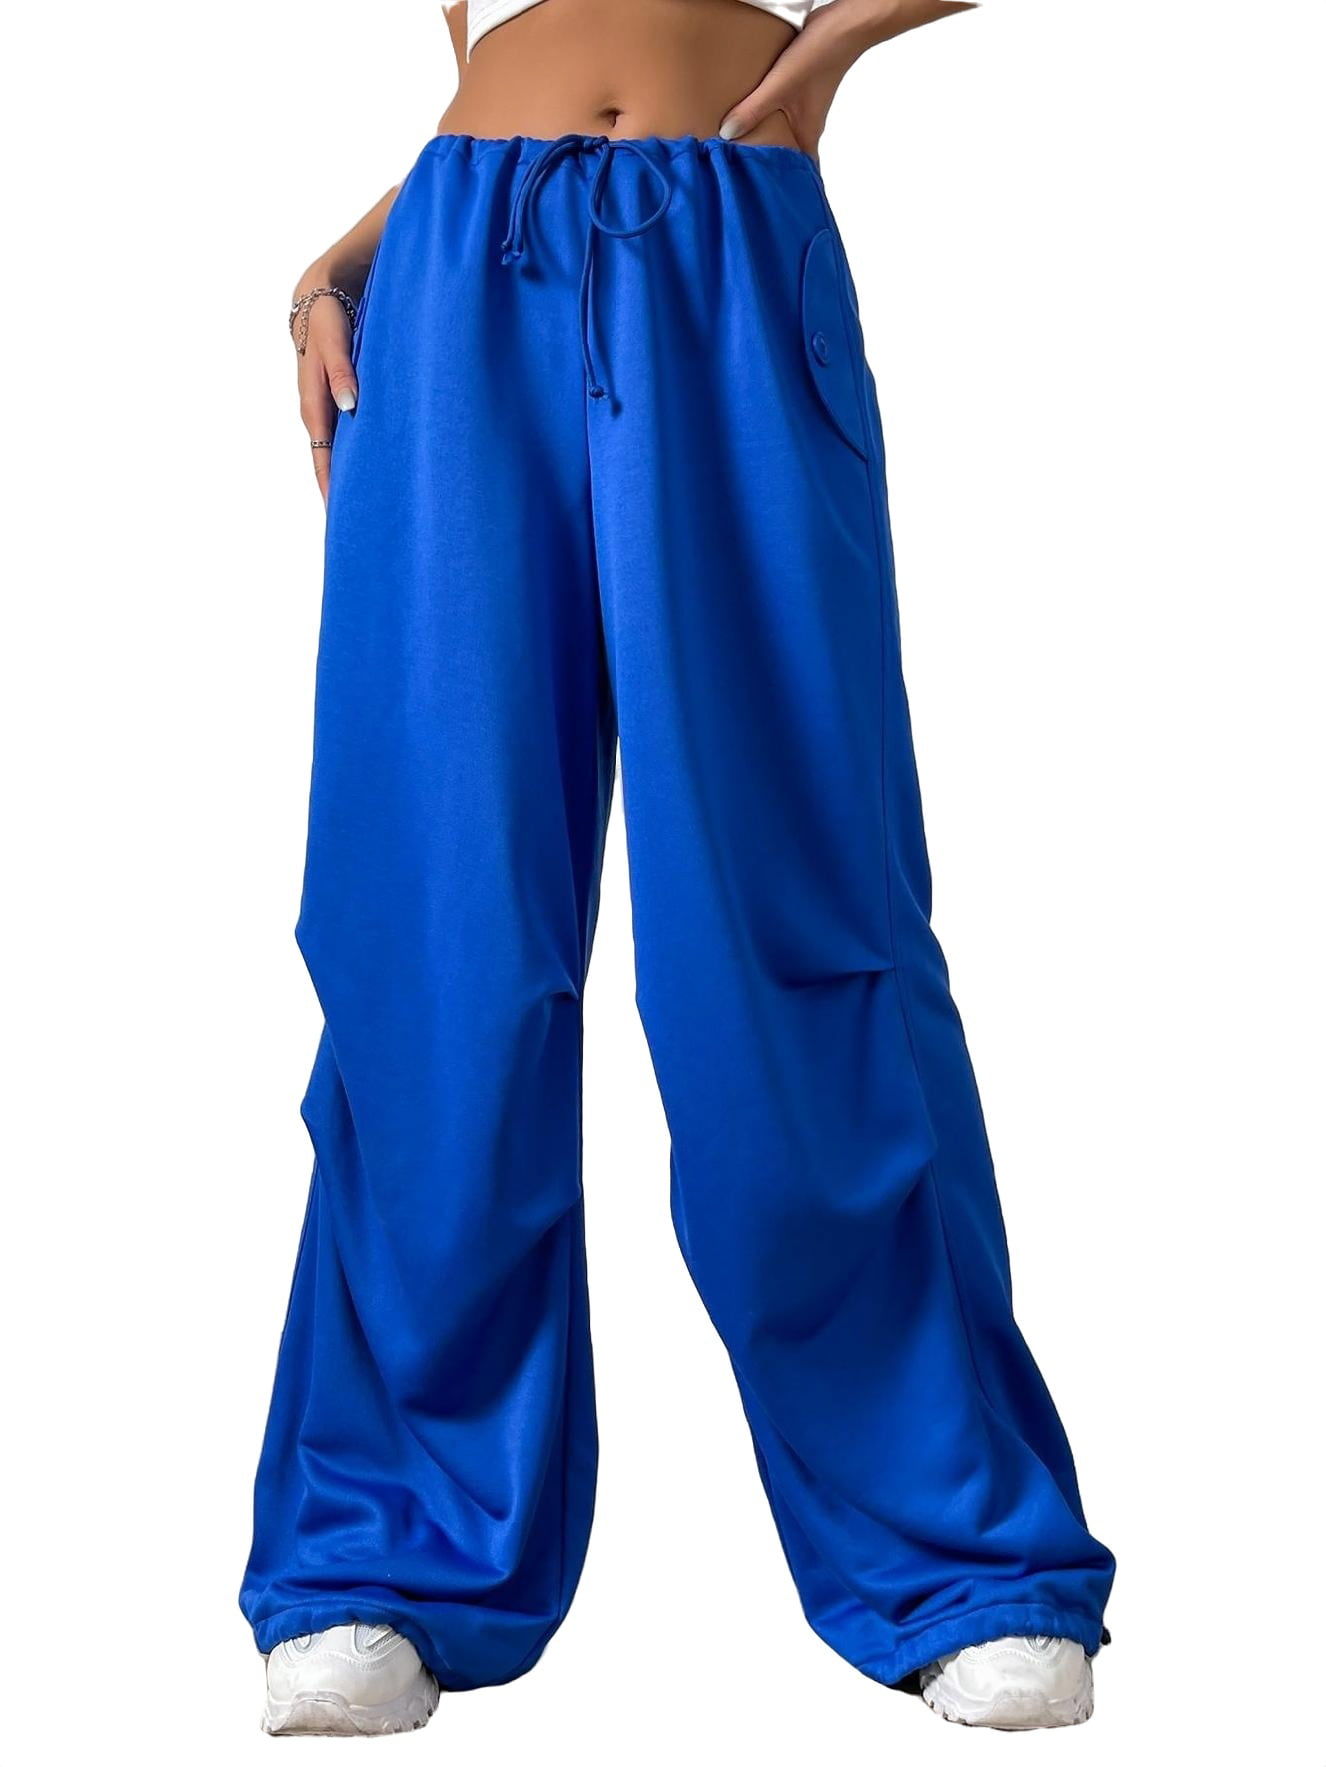 Royal Blue Women's Drawstring Waistband Fitted Pants 960